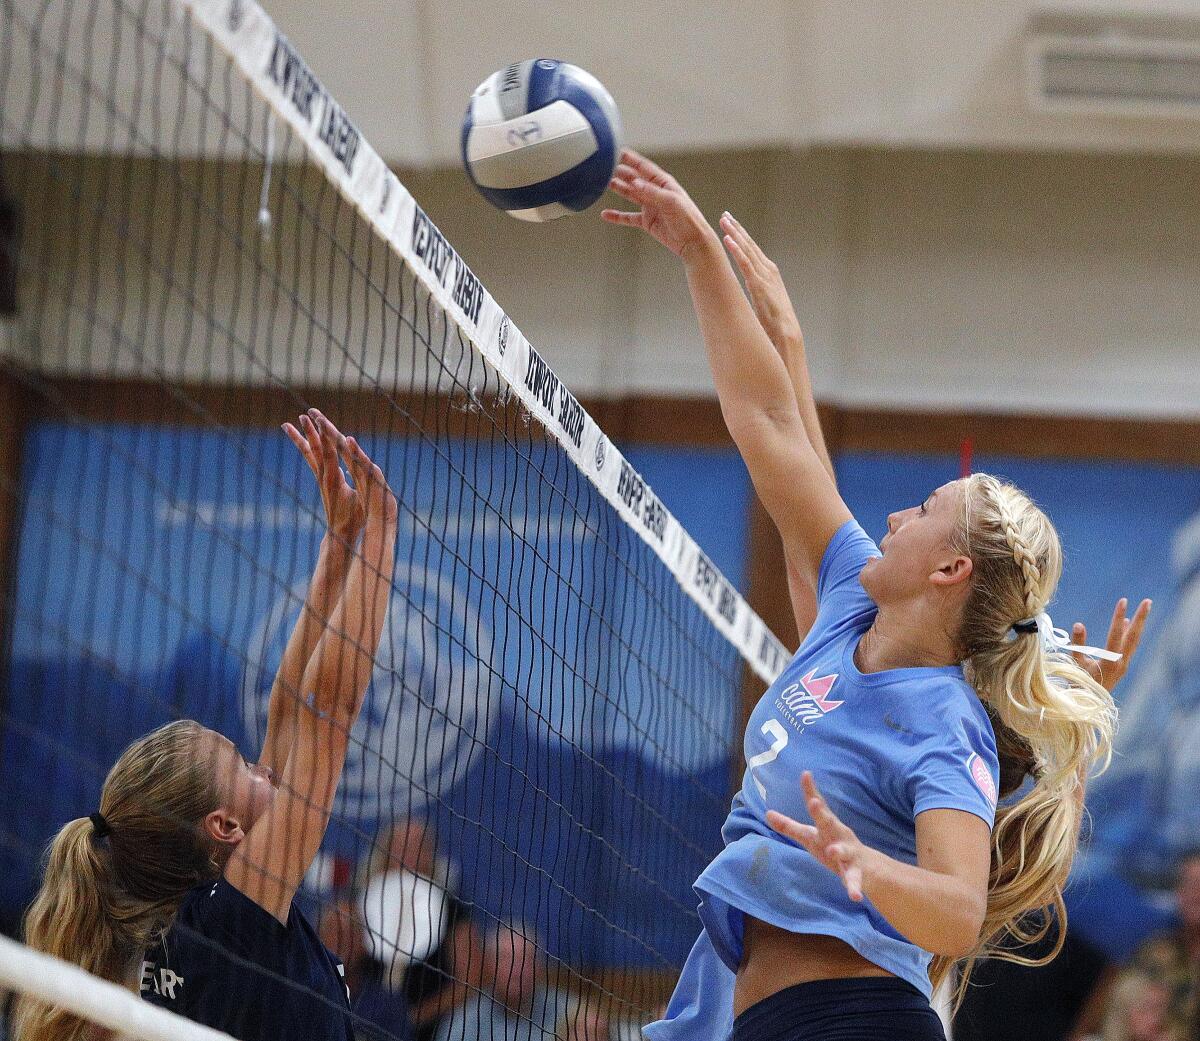 Corona del Mar's Nikki Senske (2) hits the ball back for a point in a Battle of the Bay match at Newport Harbor on Sept. 12.